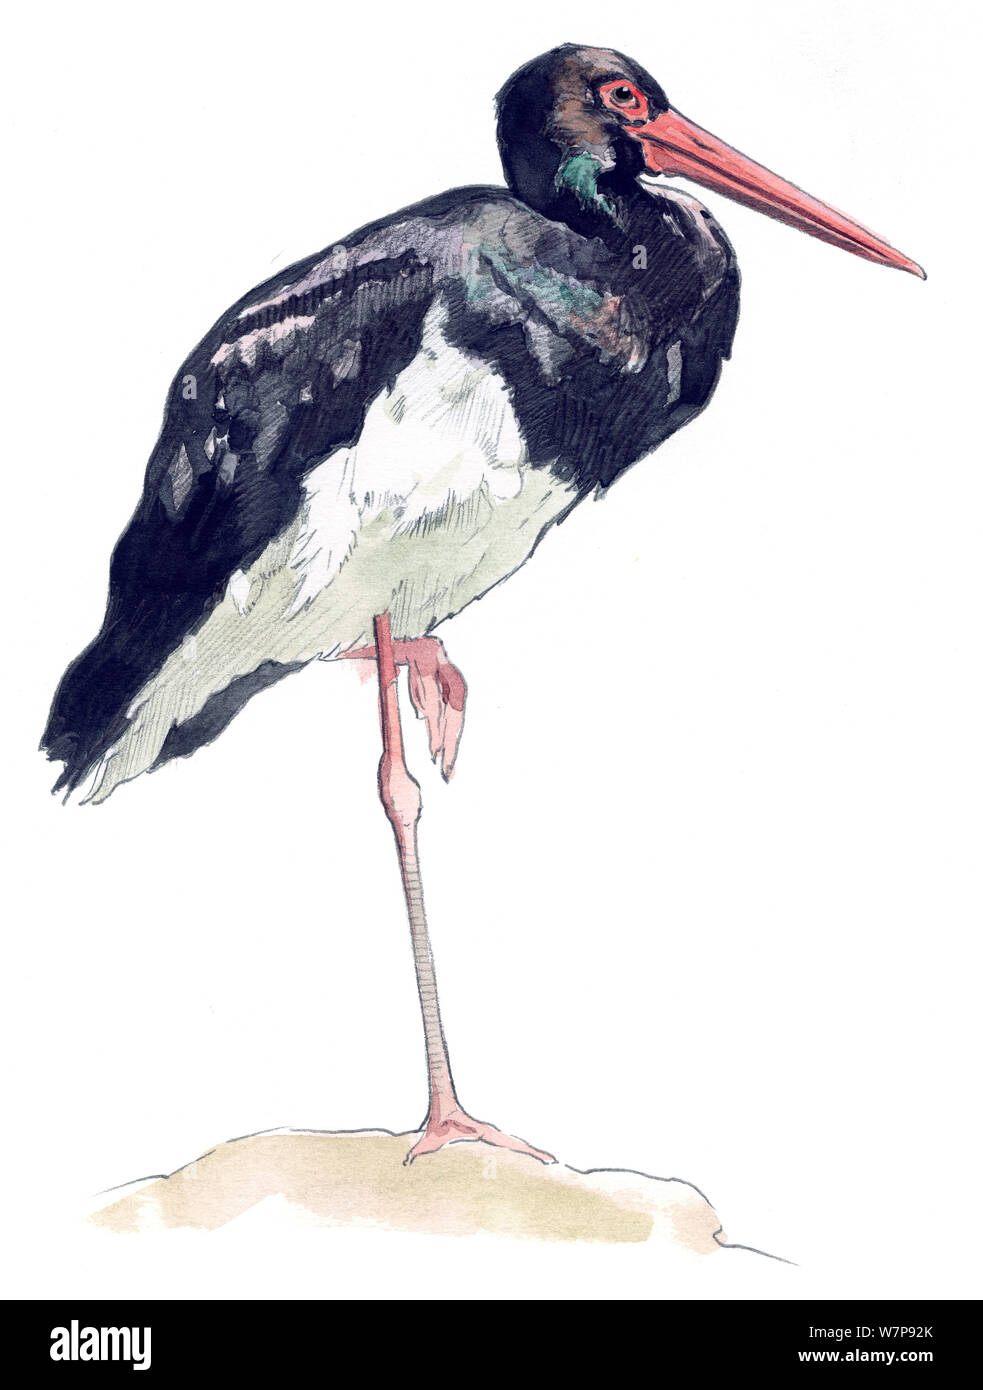 Illustration of Black Stork (Ciconia nigra). Pencil and watercolor painting. Stock Photo